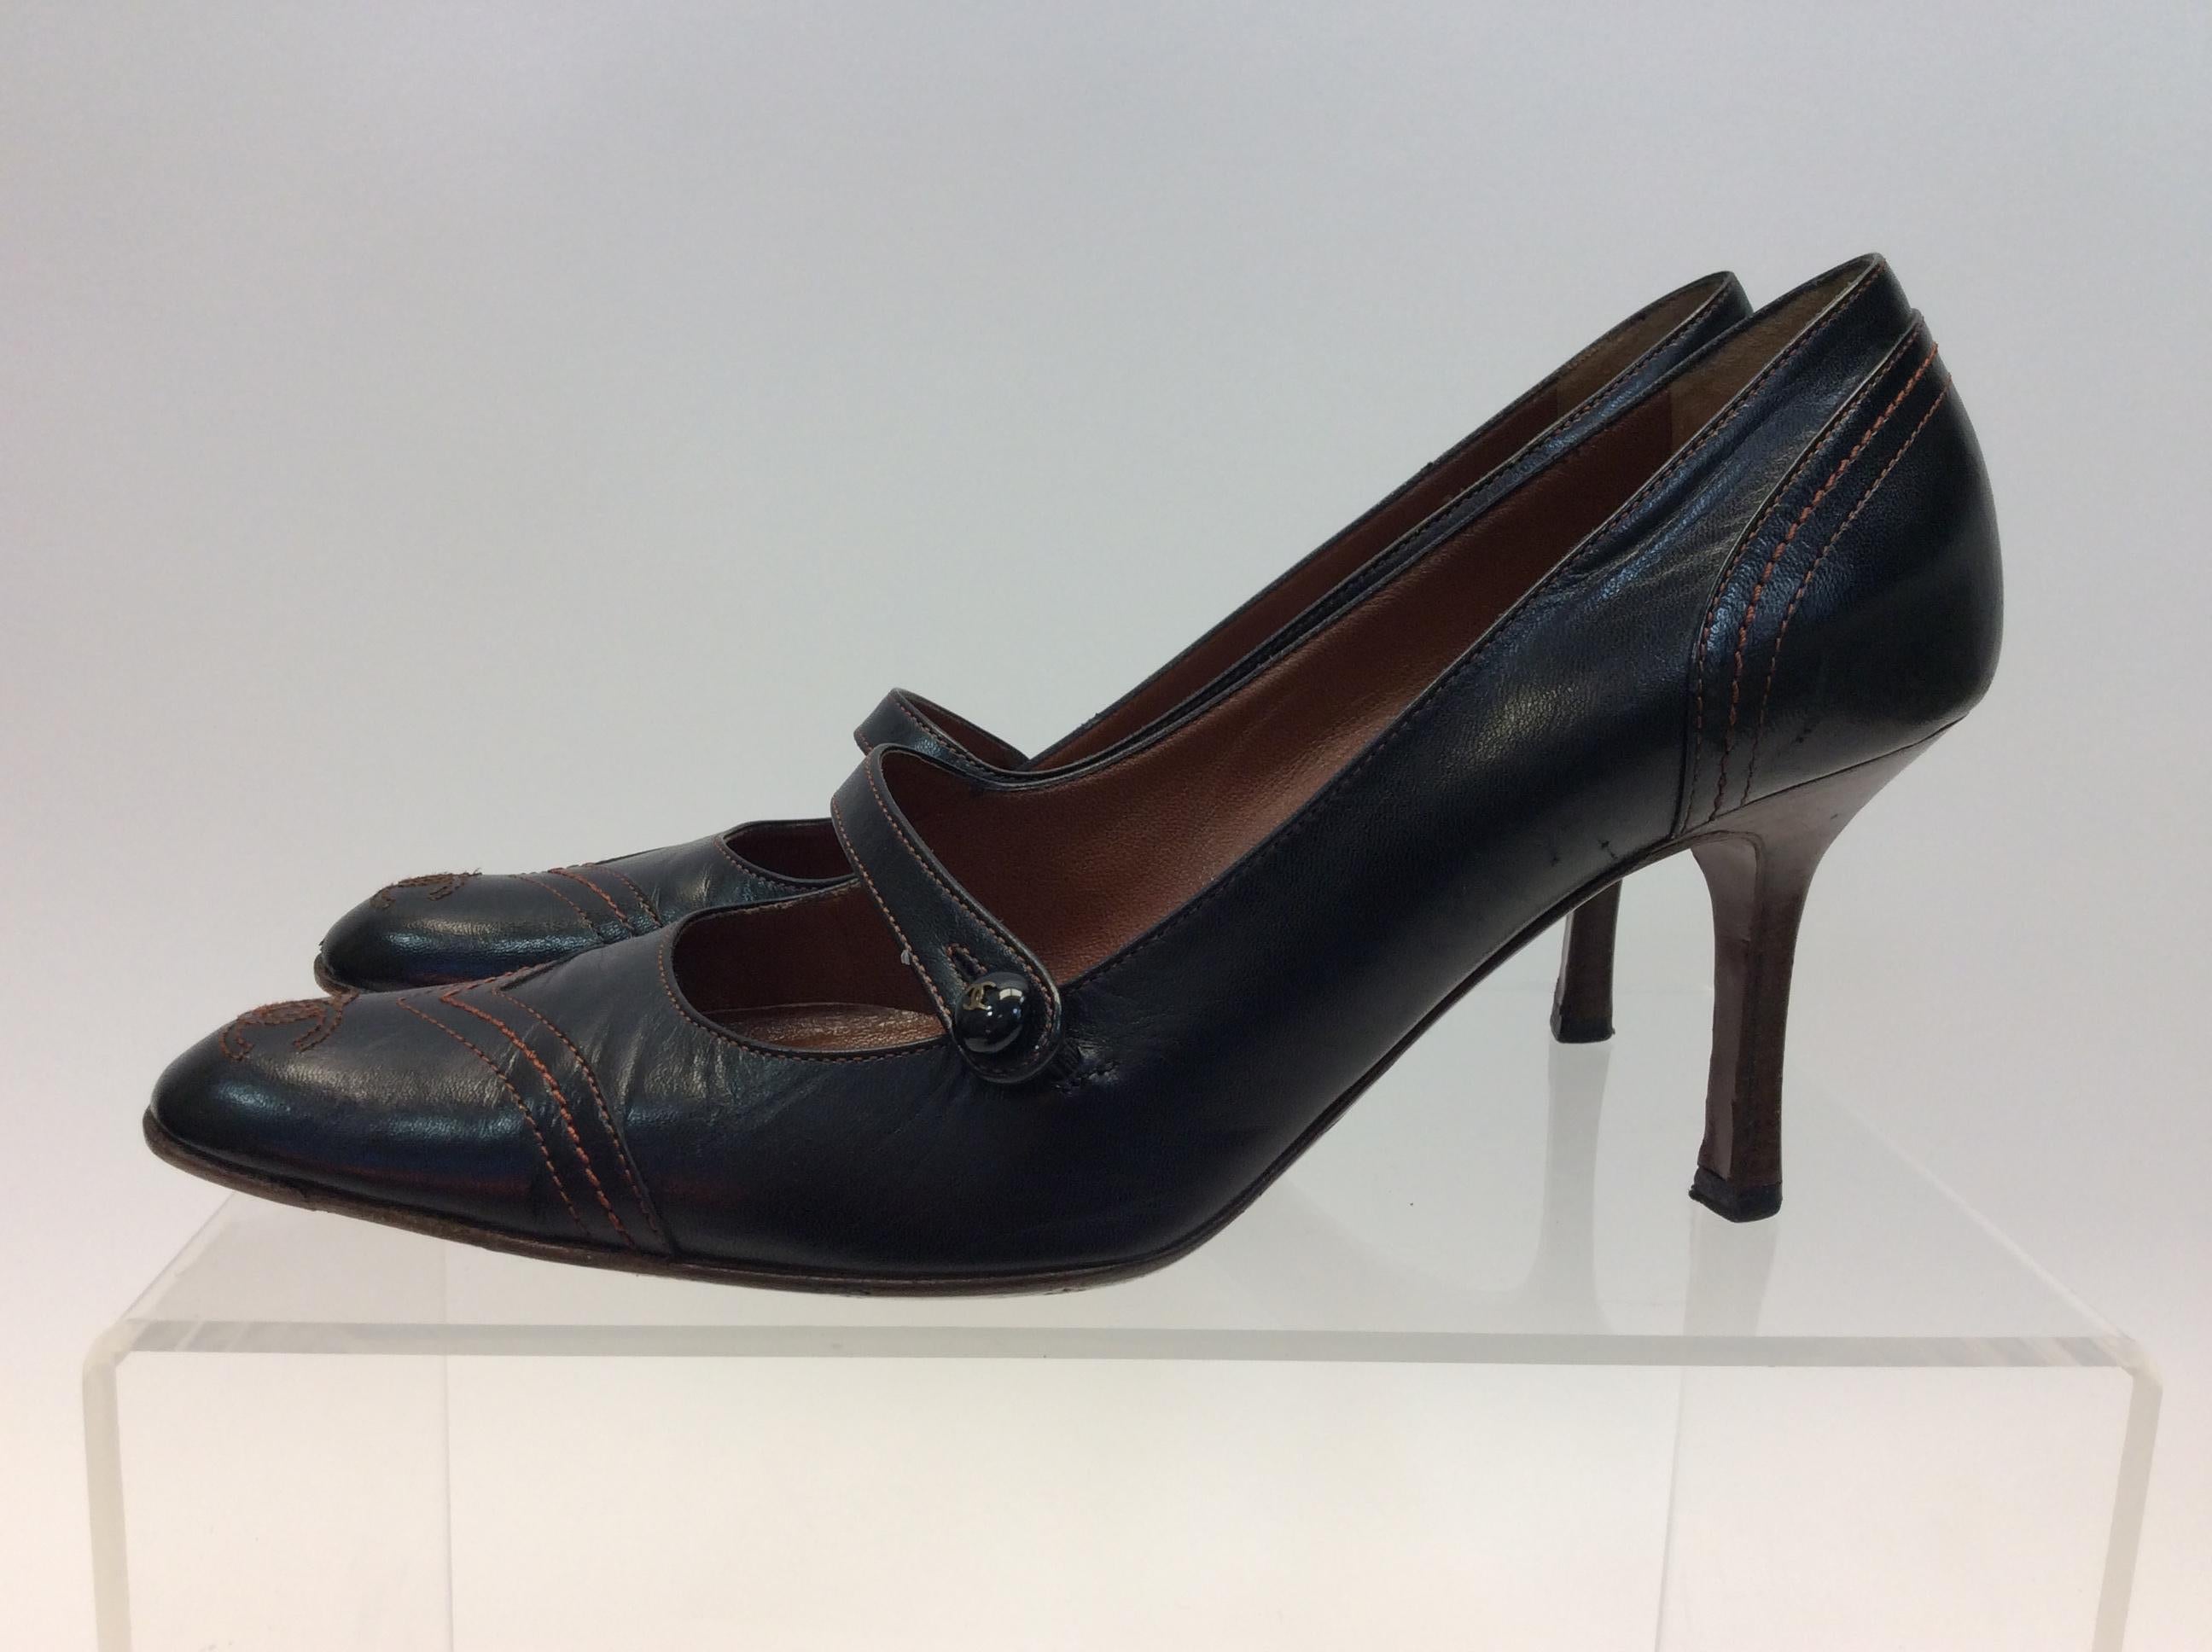 Chanel Black Leather Pump
$225
Made in Italy
Leather
Size 37.5
3